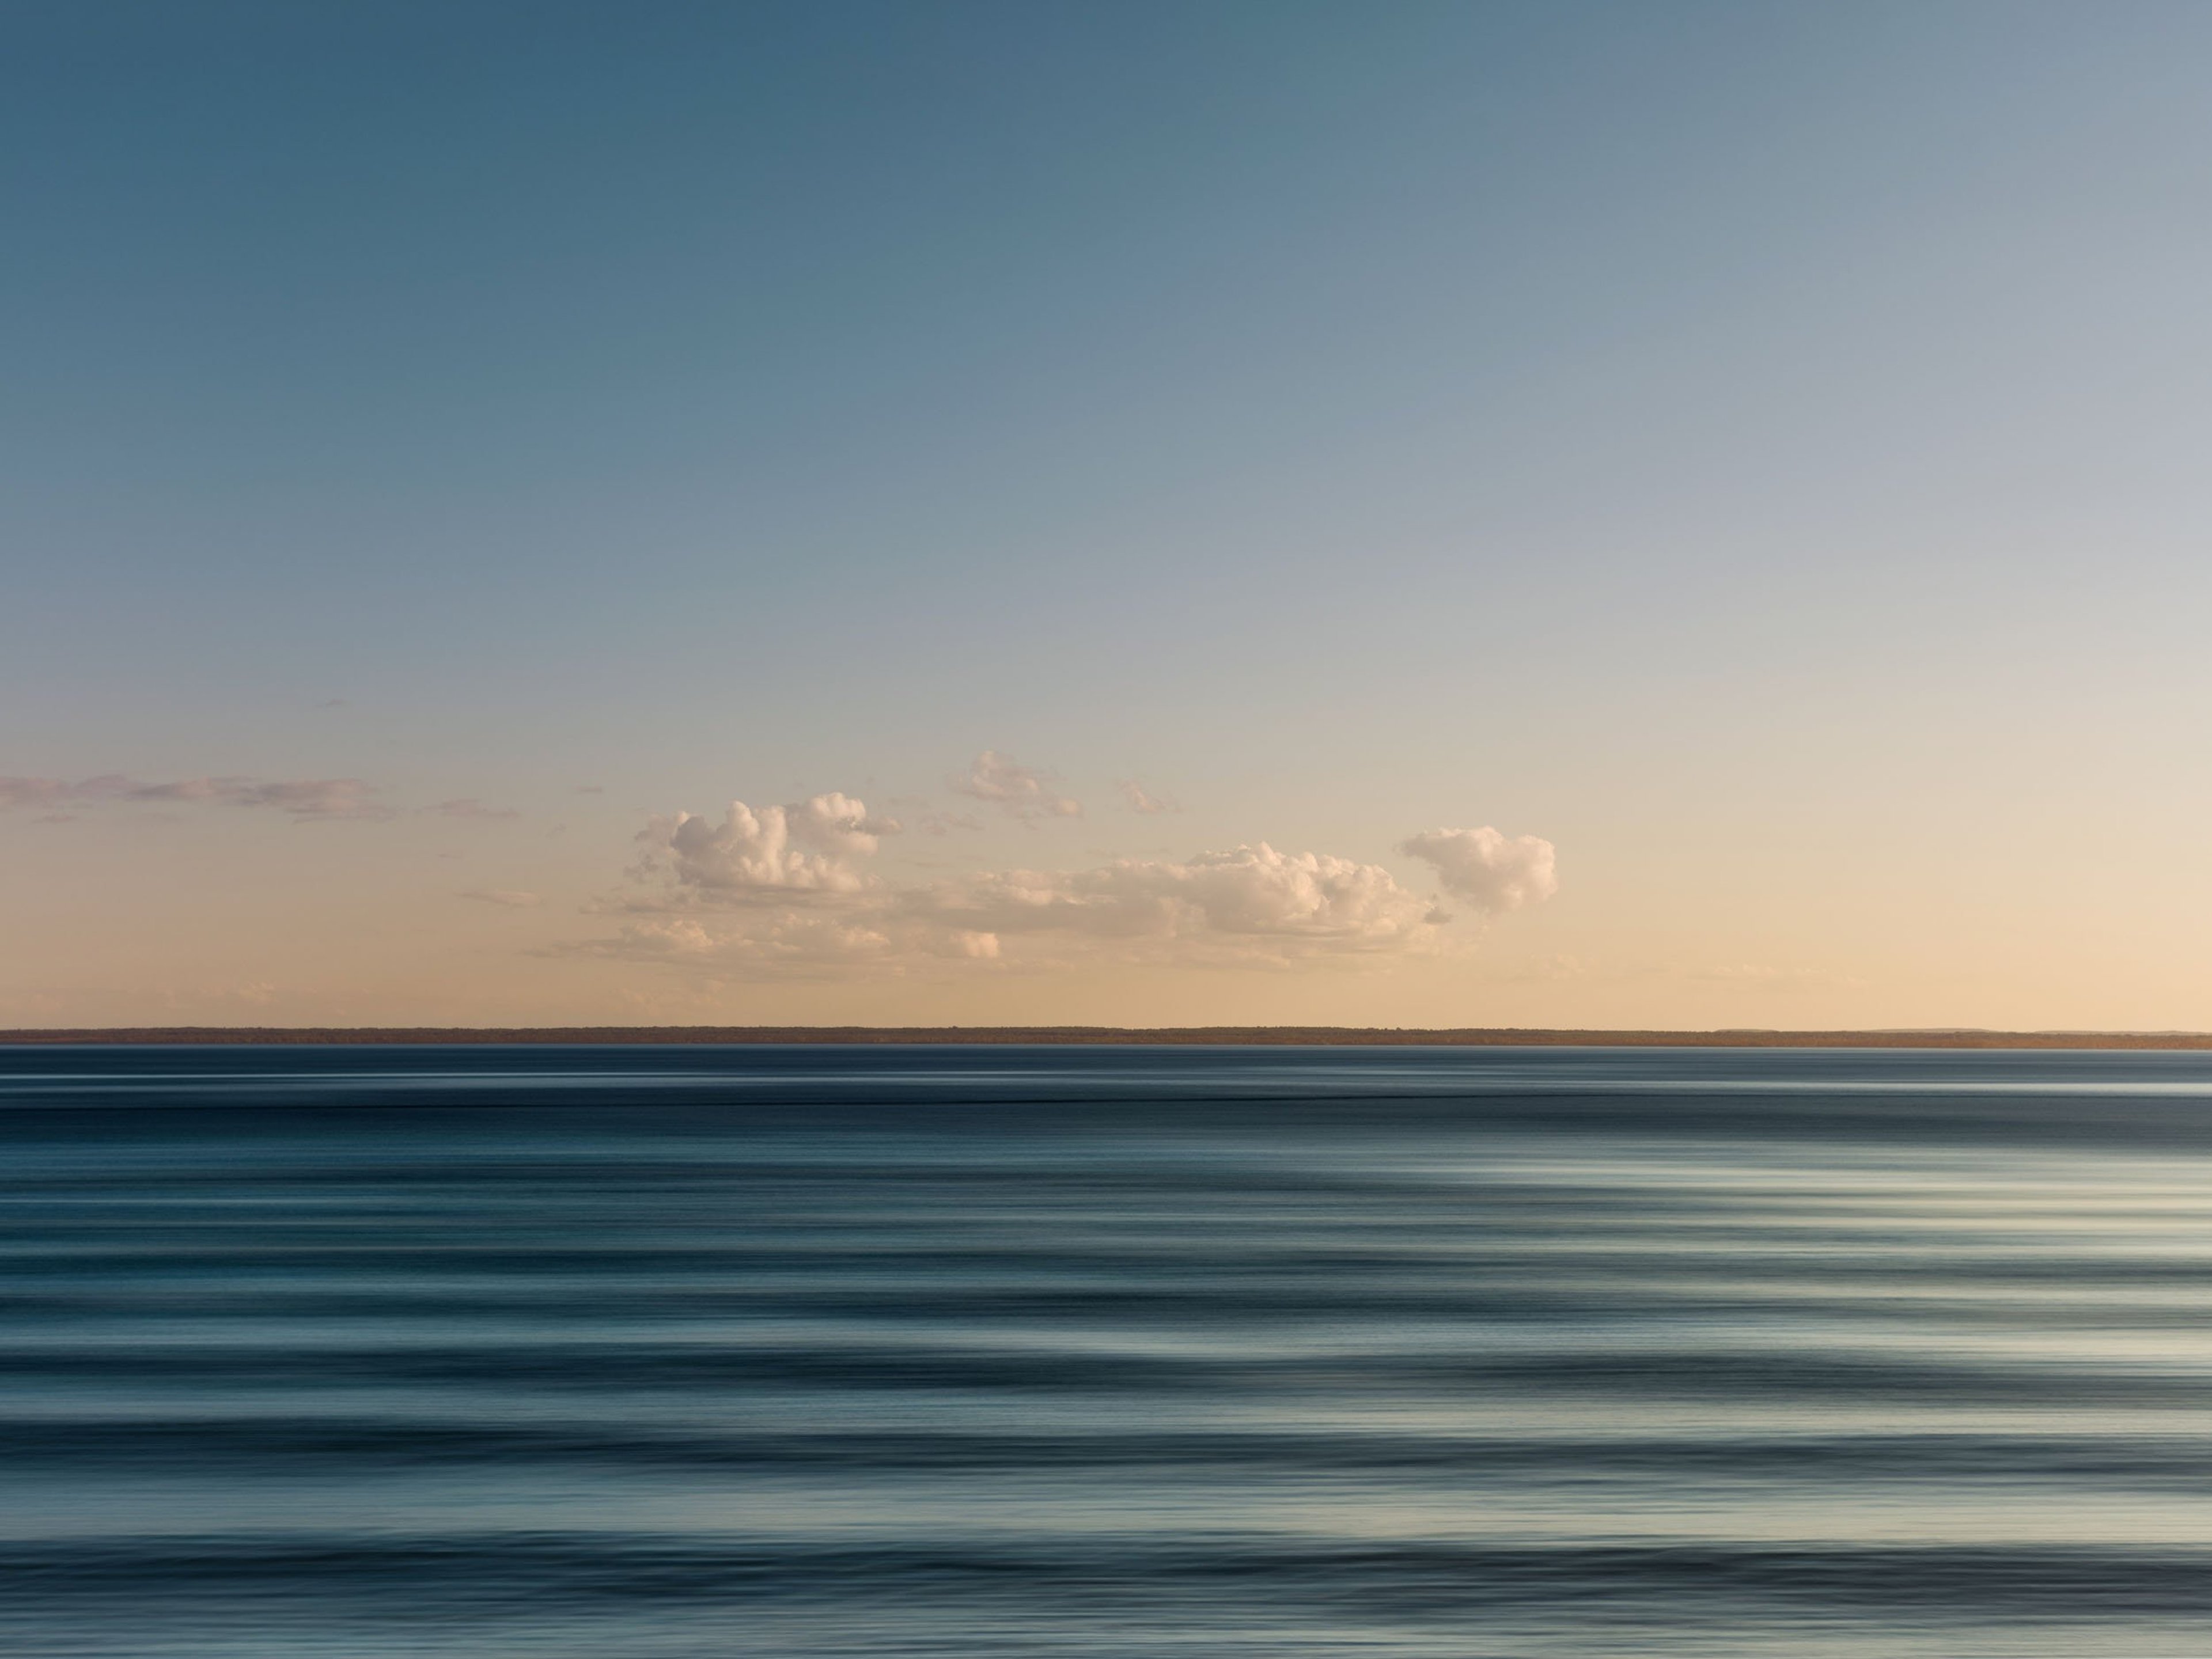 Landscape of a still rippled ocean at dusk in mild weather with clouds across the sky.